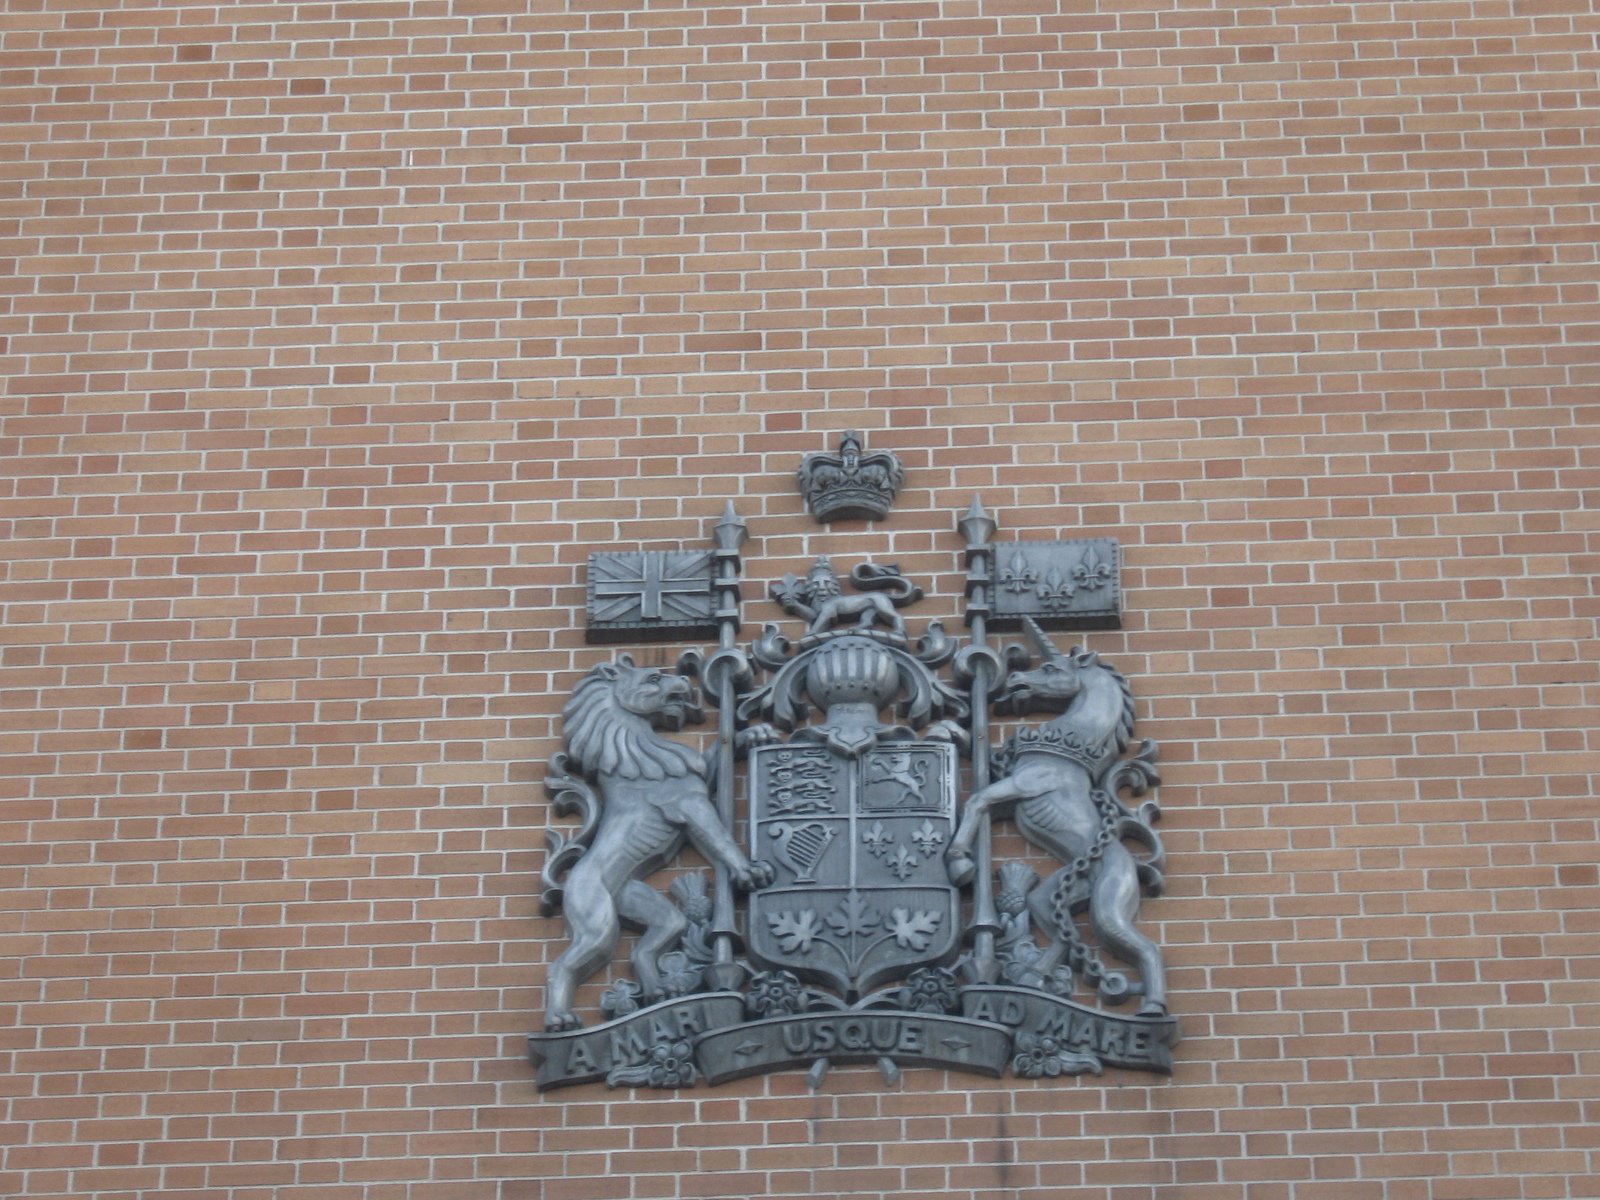 an ornate brick wall with a coat of arms and two lions